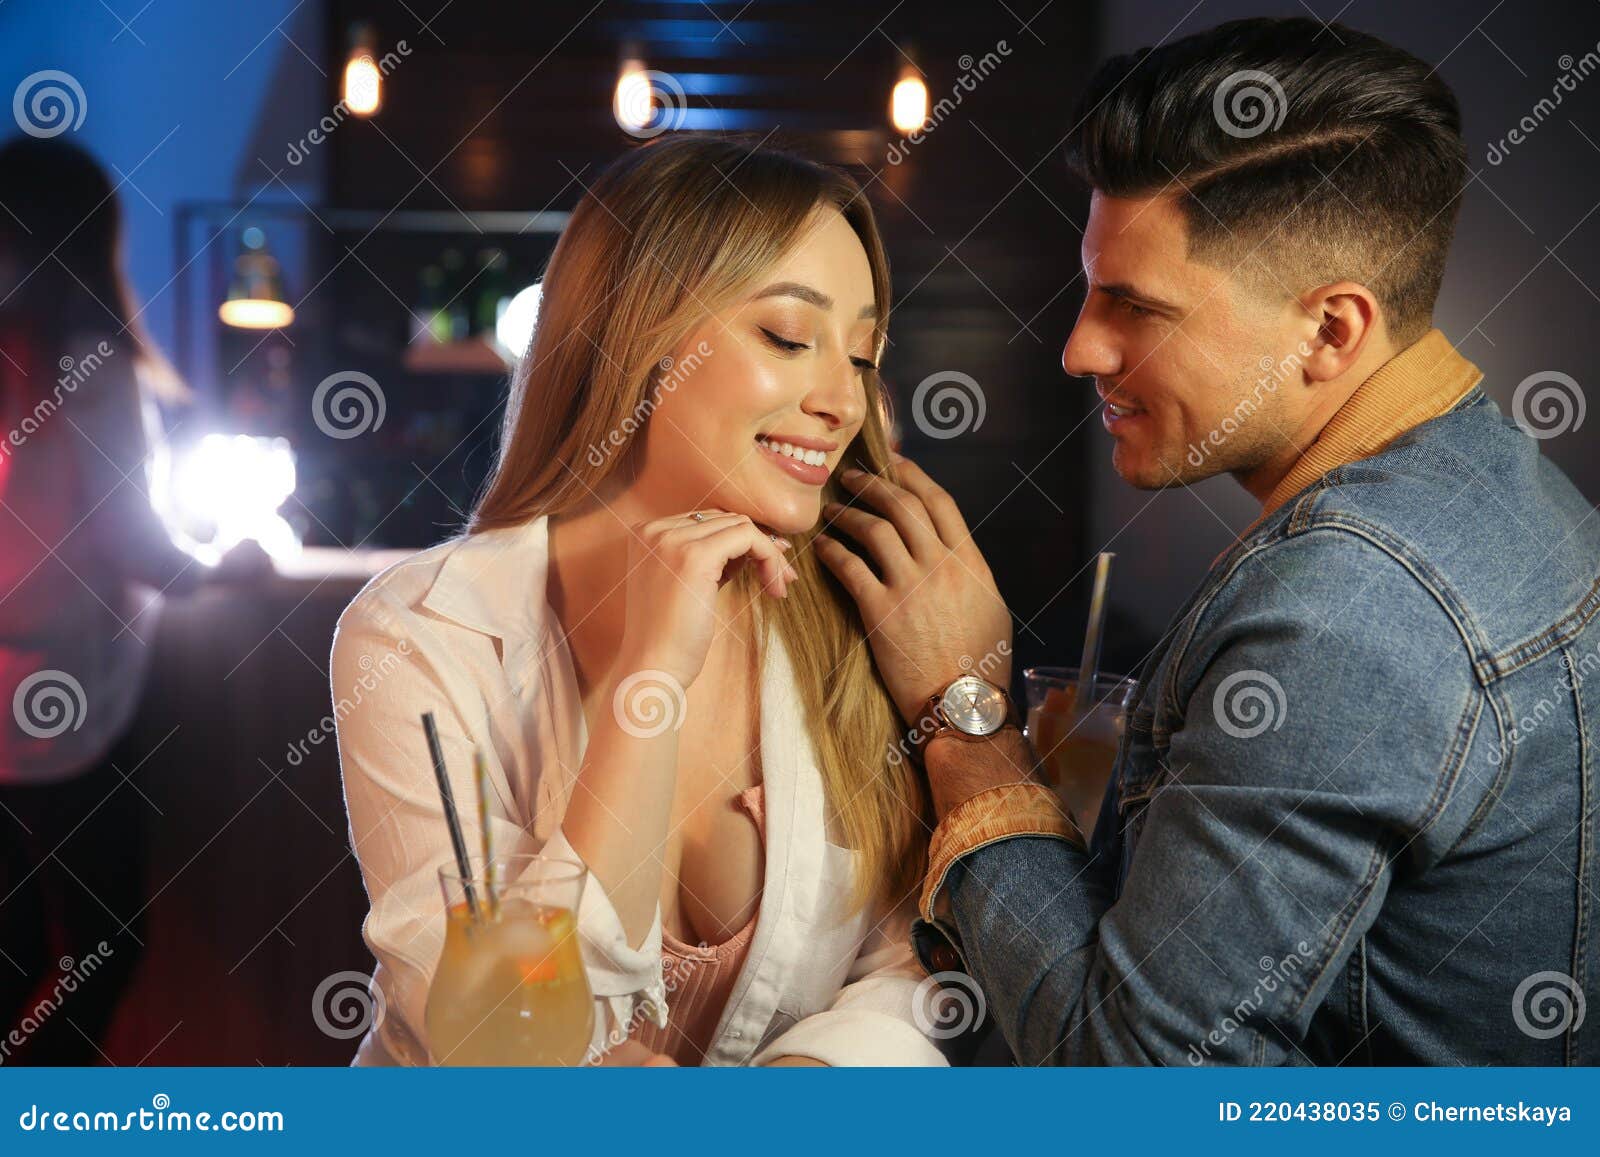 man and woman flirting with each other